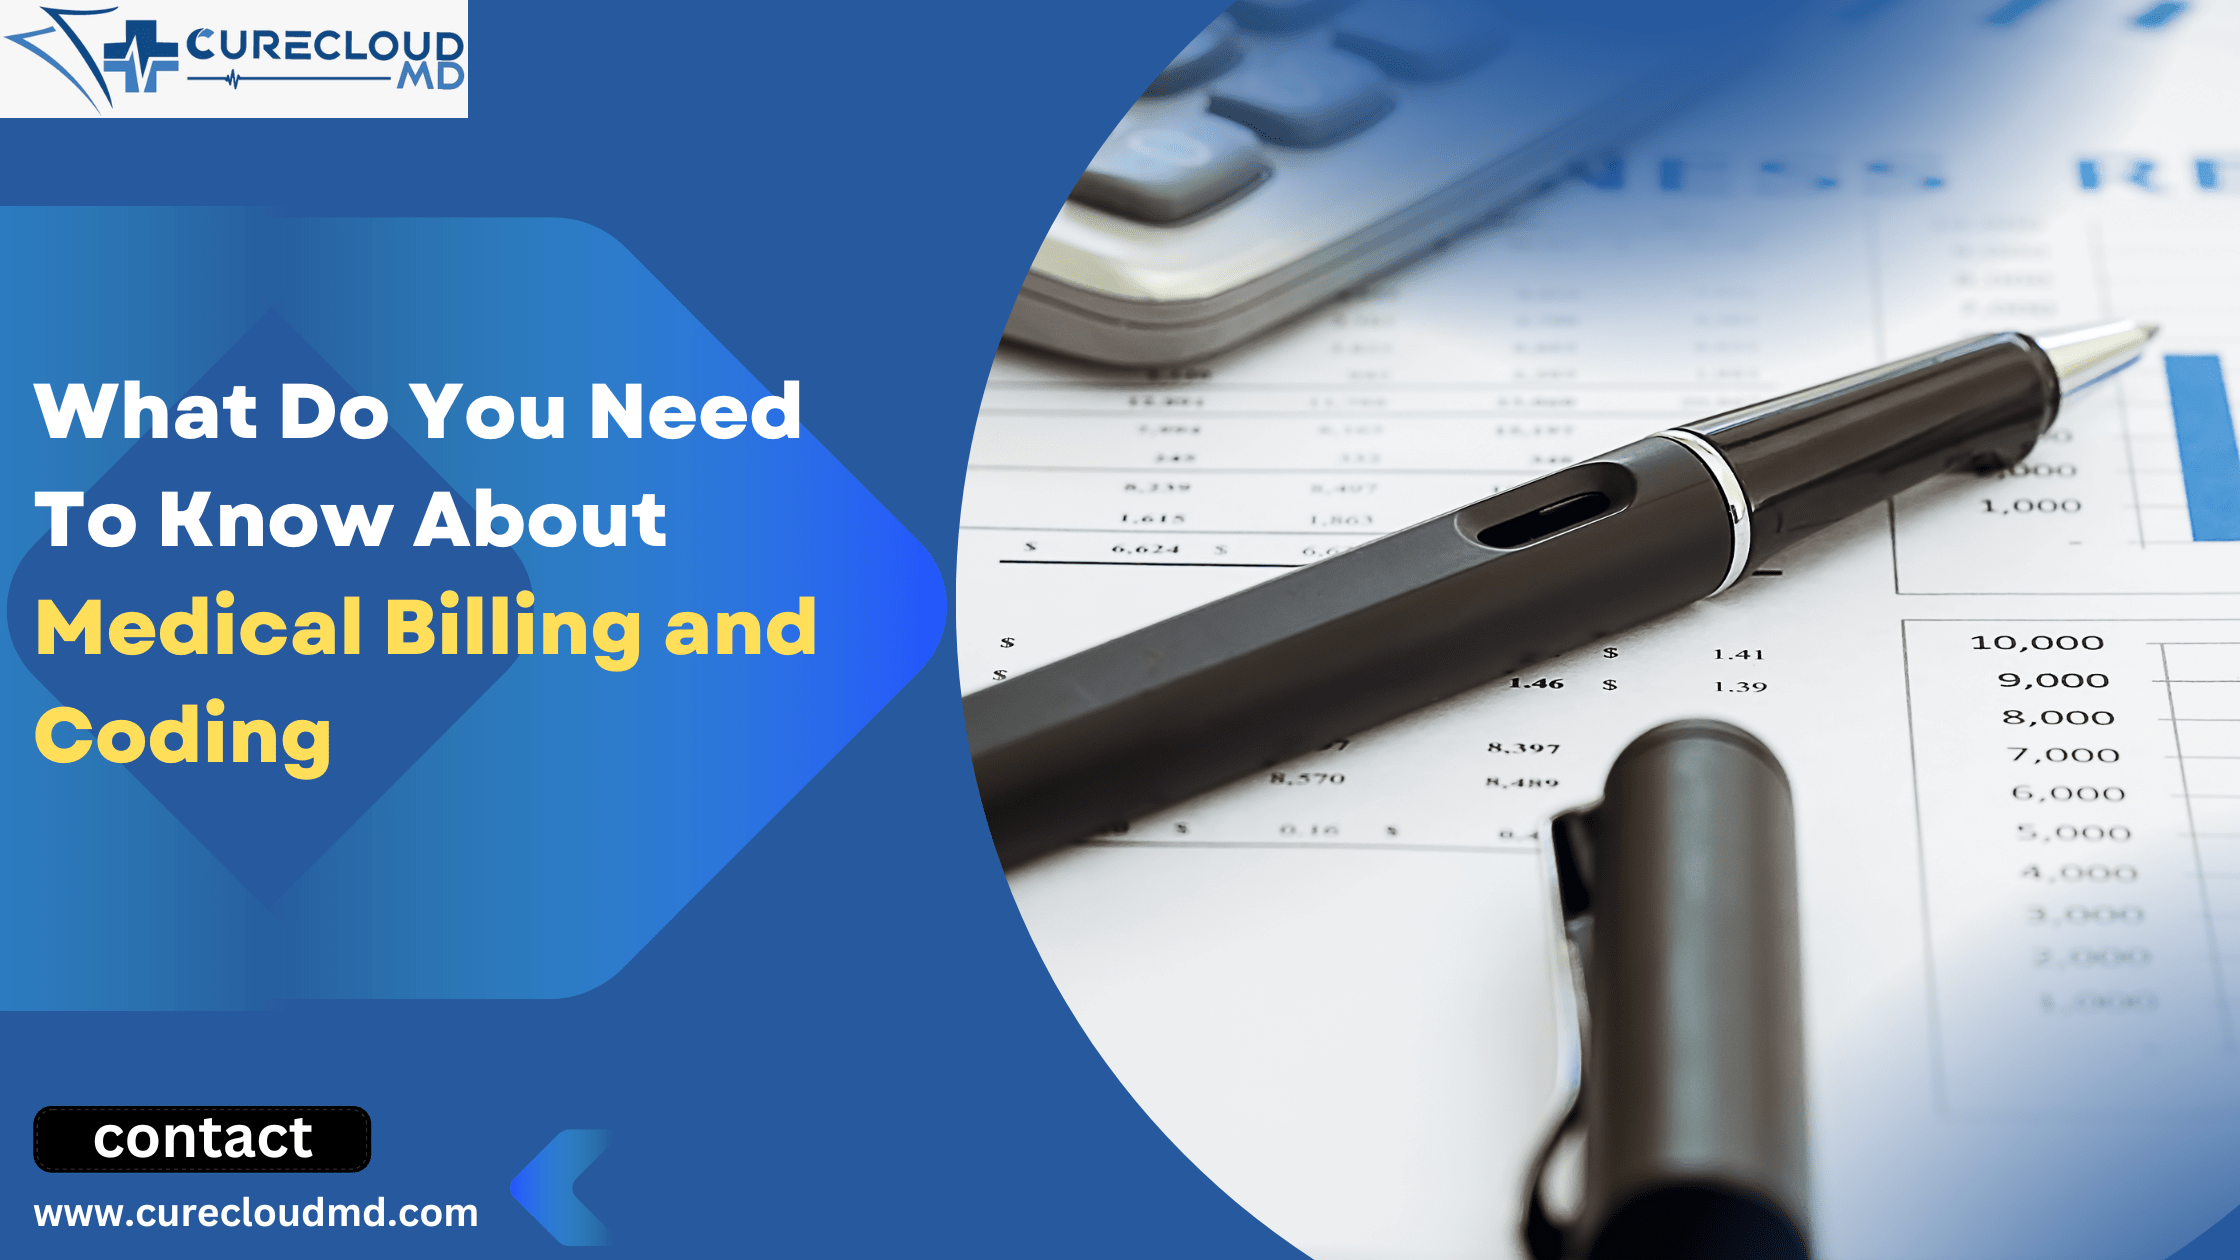 What Do You Need To Know About Medical Billing and Coding